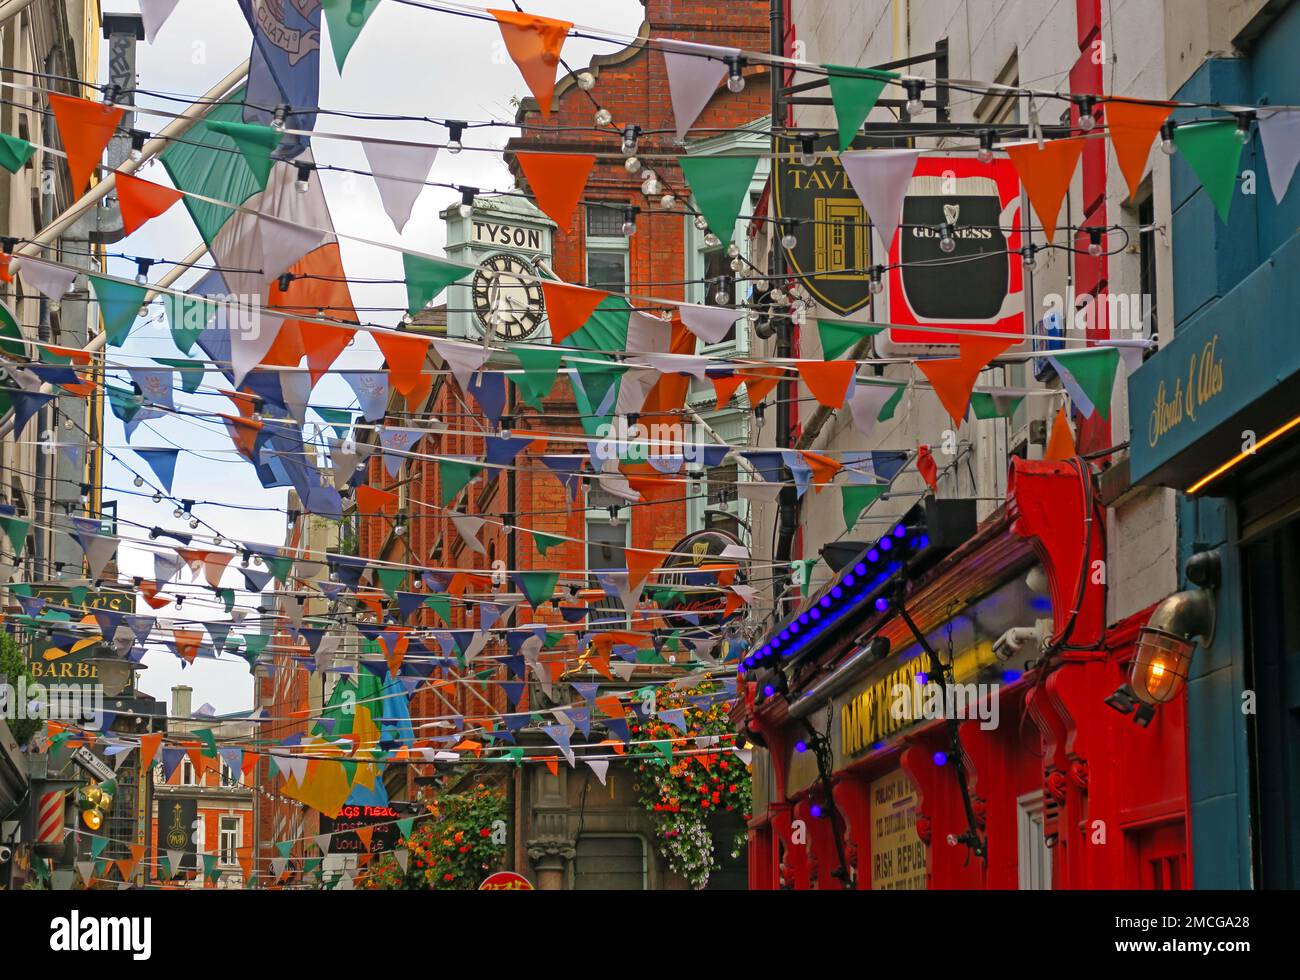 Pubs and flags, bunting in Temple Bar, Dame Ct, Tyson Clock, bars, St Patricks Day celebrations, Dublin, Eire, Ireland Stock Photo